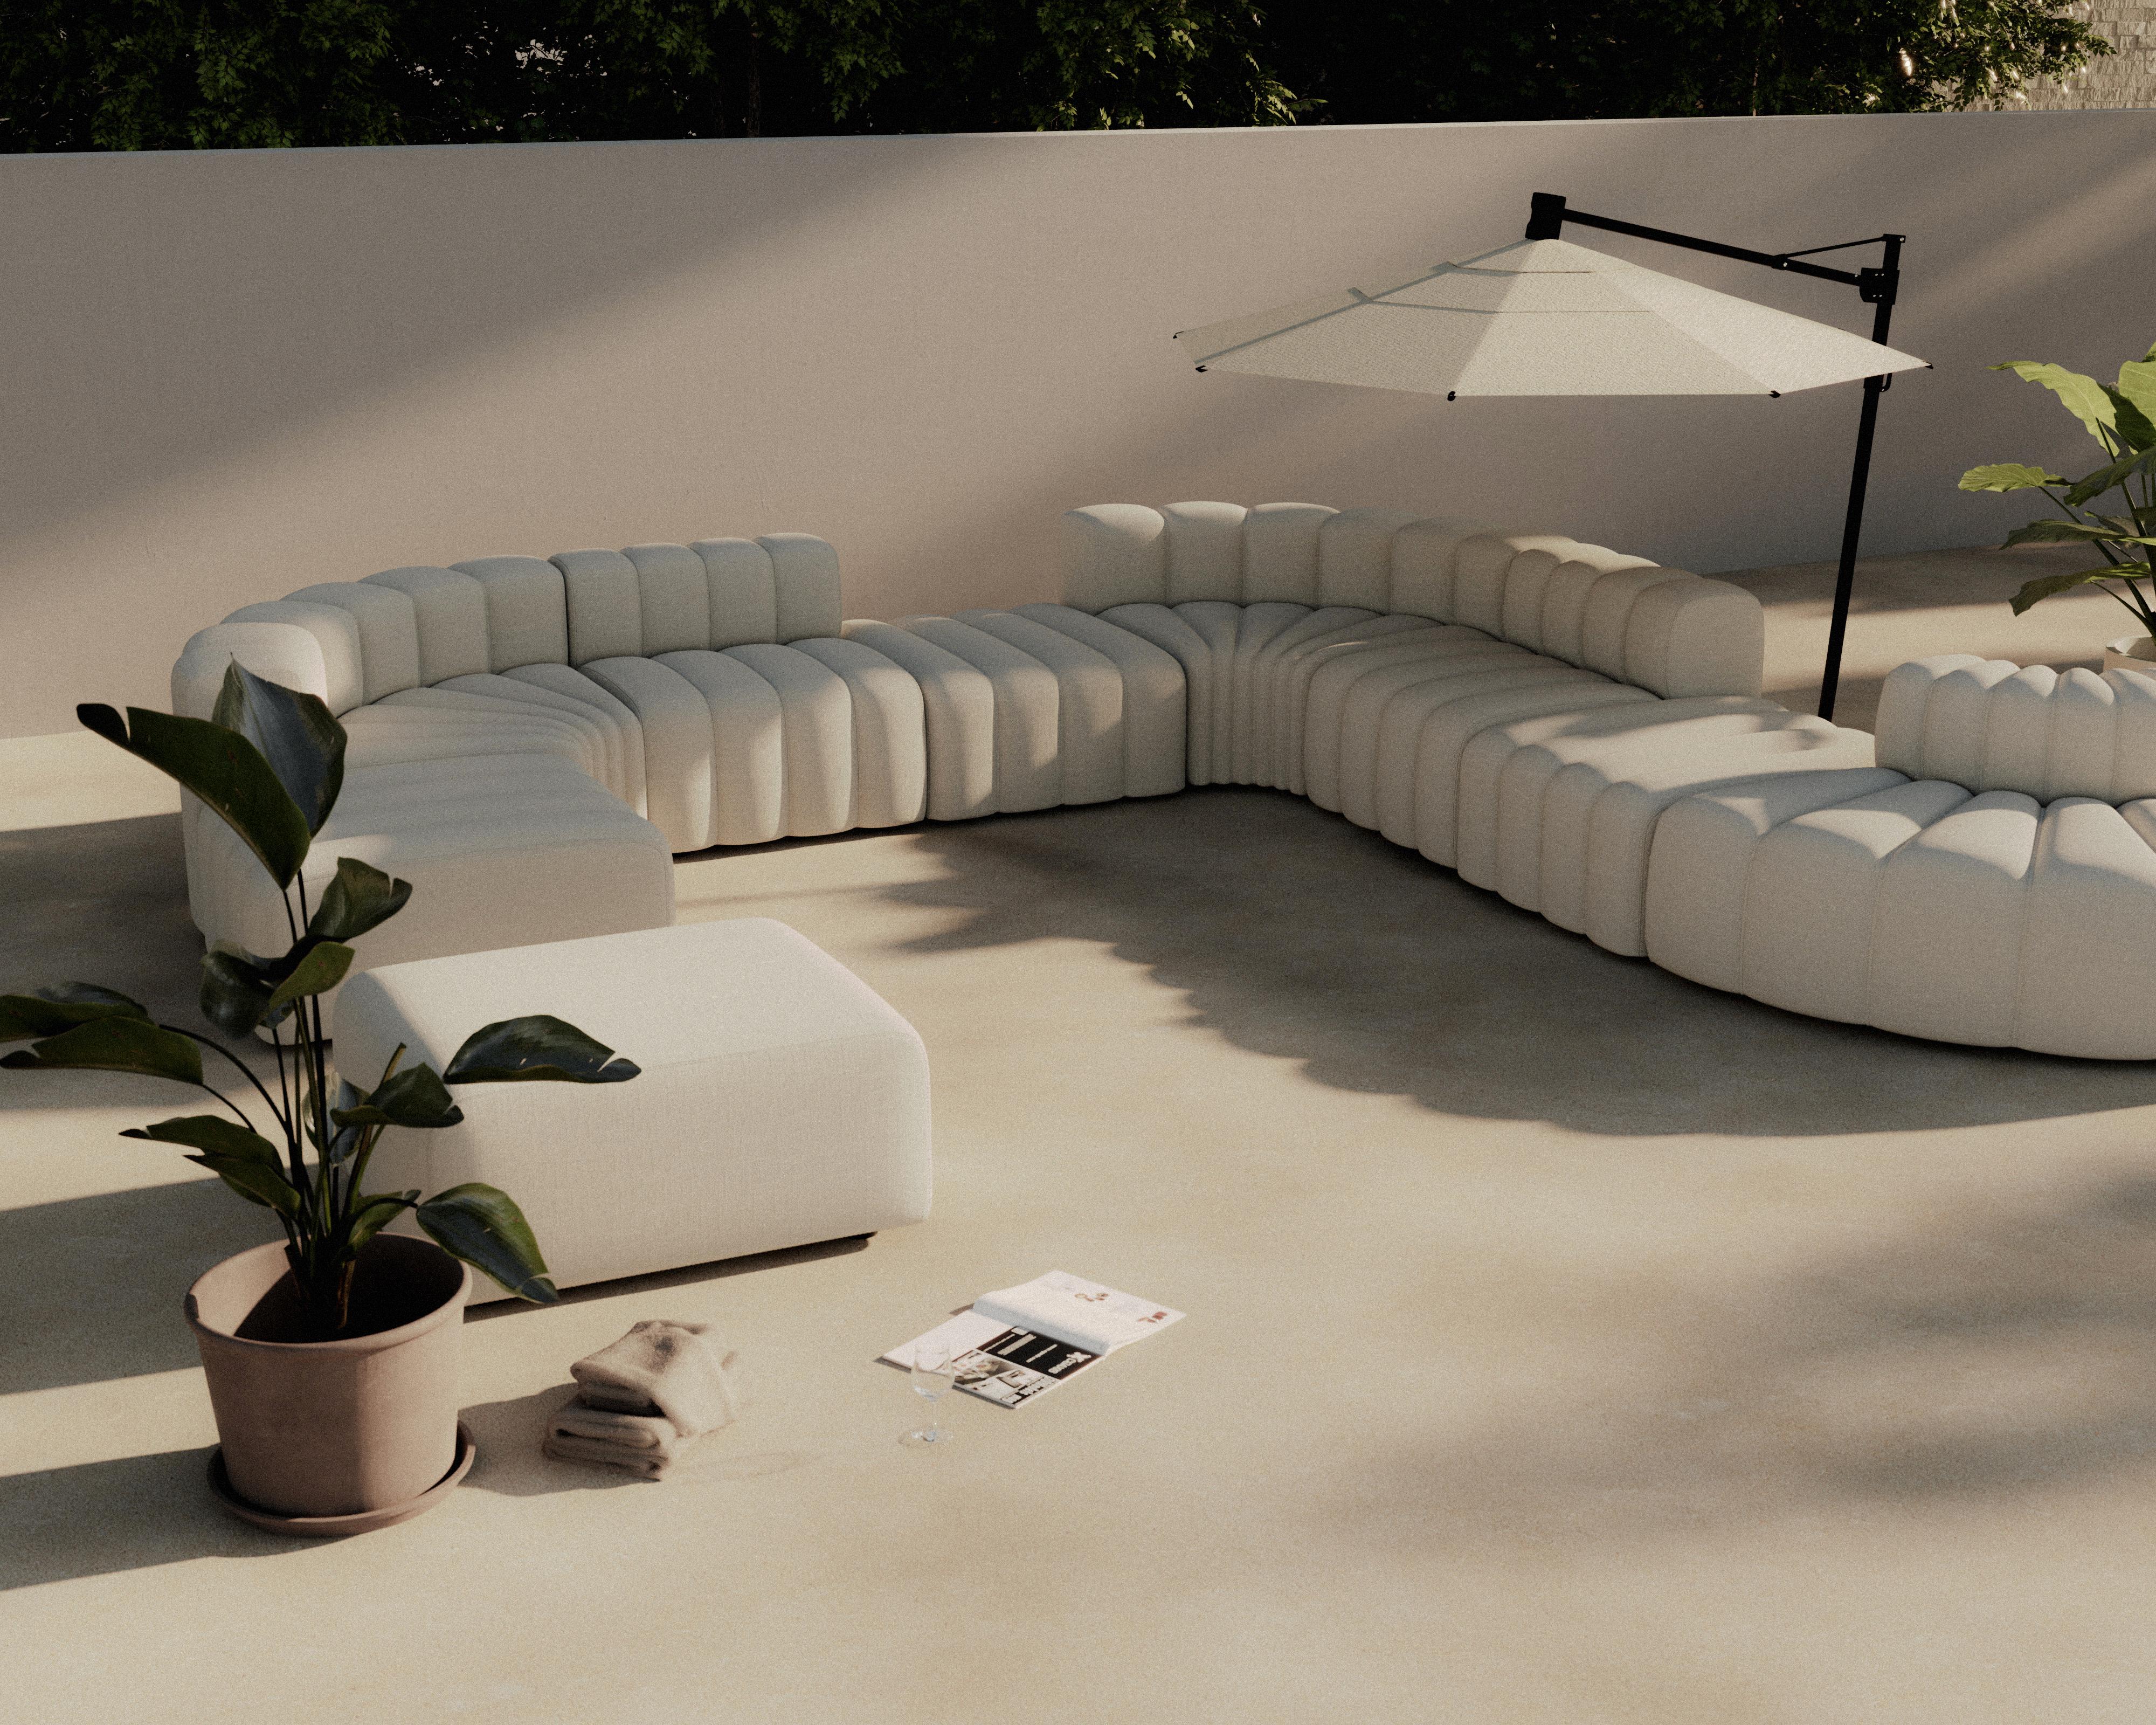 Other Studio Curve Modular Outdoor Sofa by NORR11 For Sale